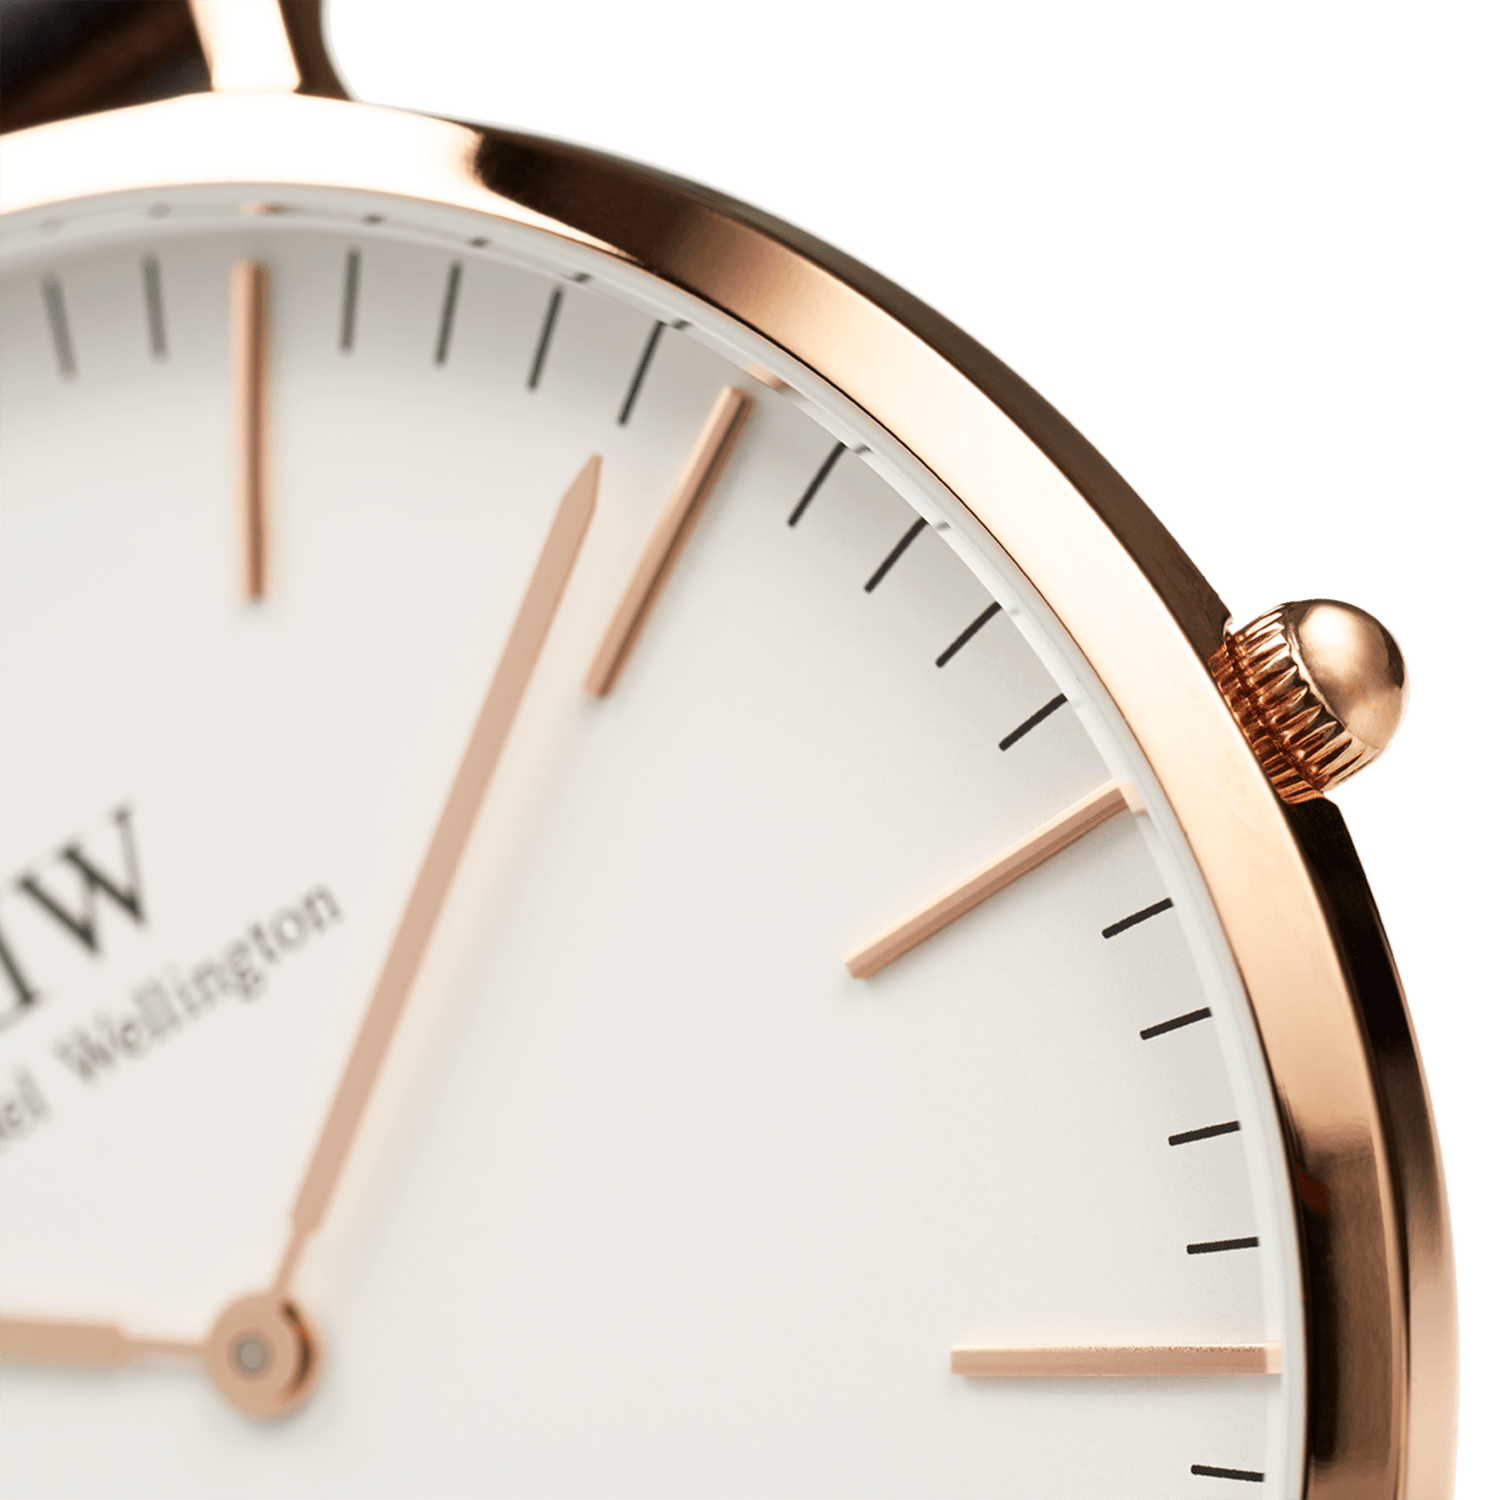 Sheffield - Men's watch in rose gold & white dial 40mm | DW